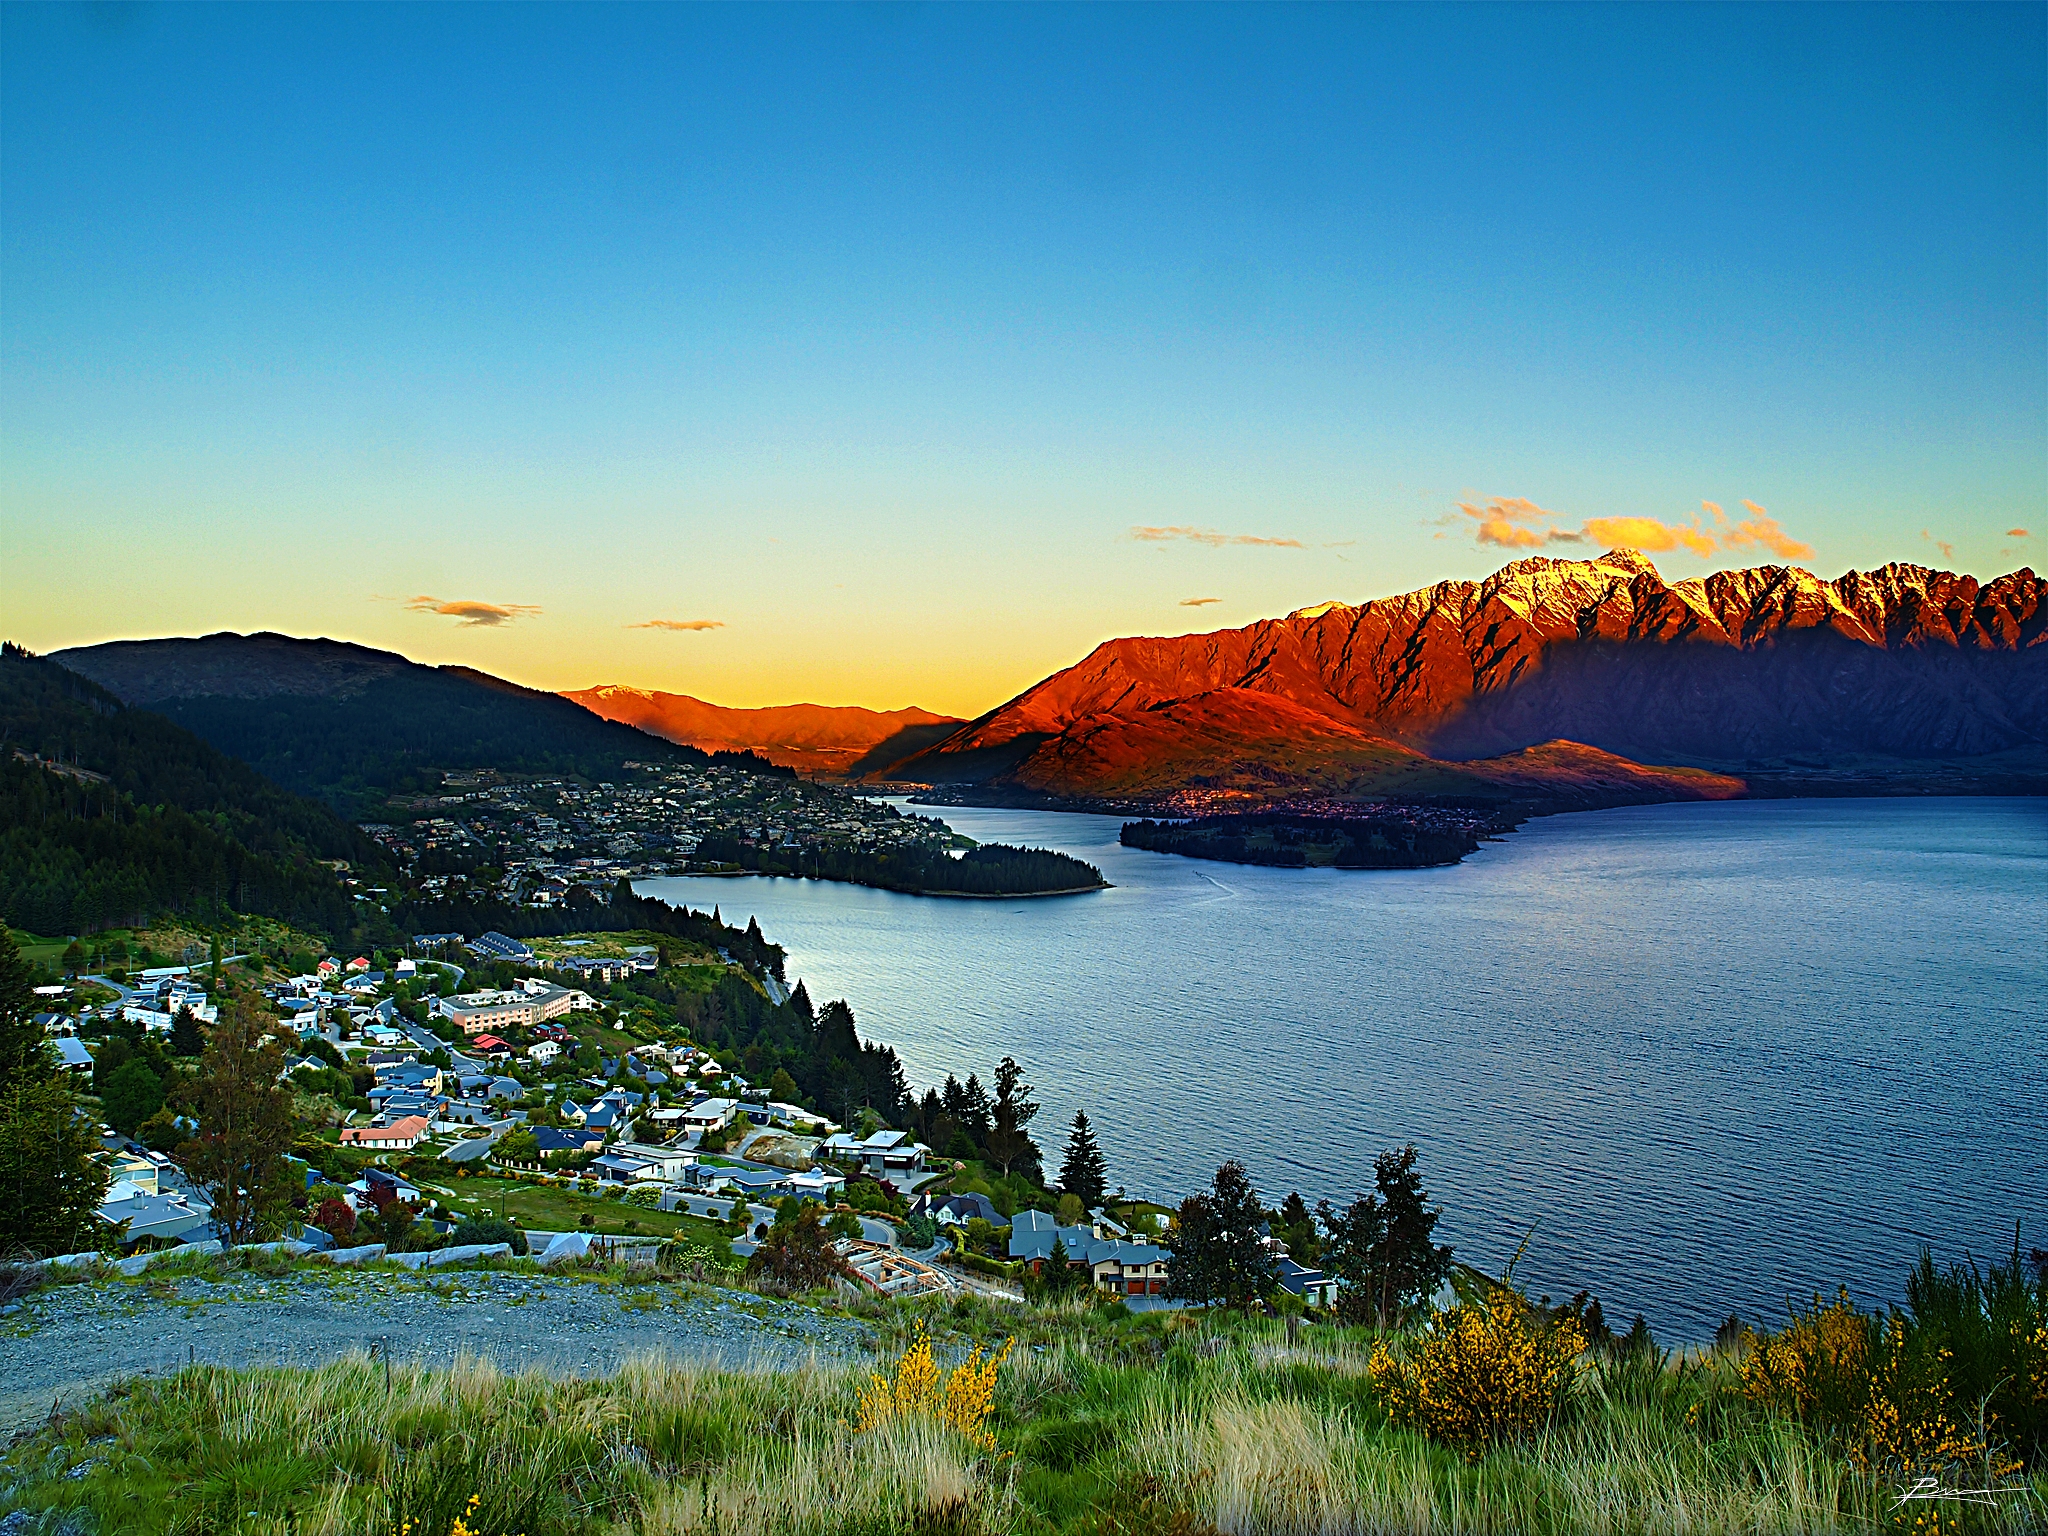 The 6 best New Zealand road trips you should take - Skyscanner Singapore